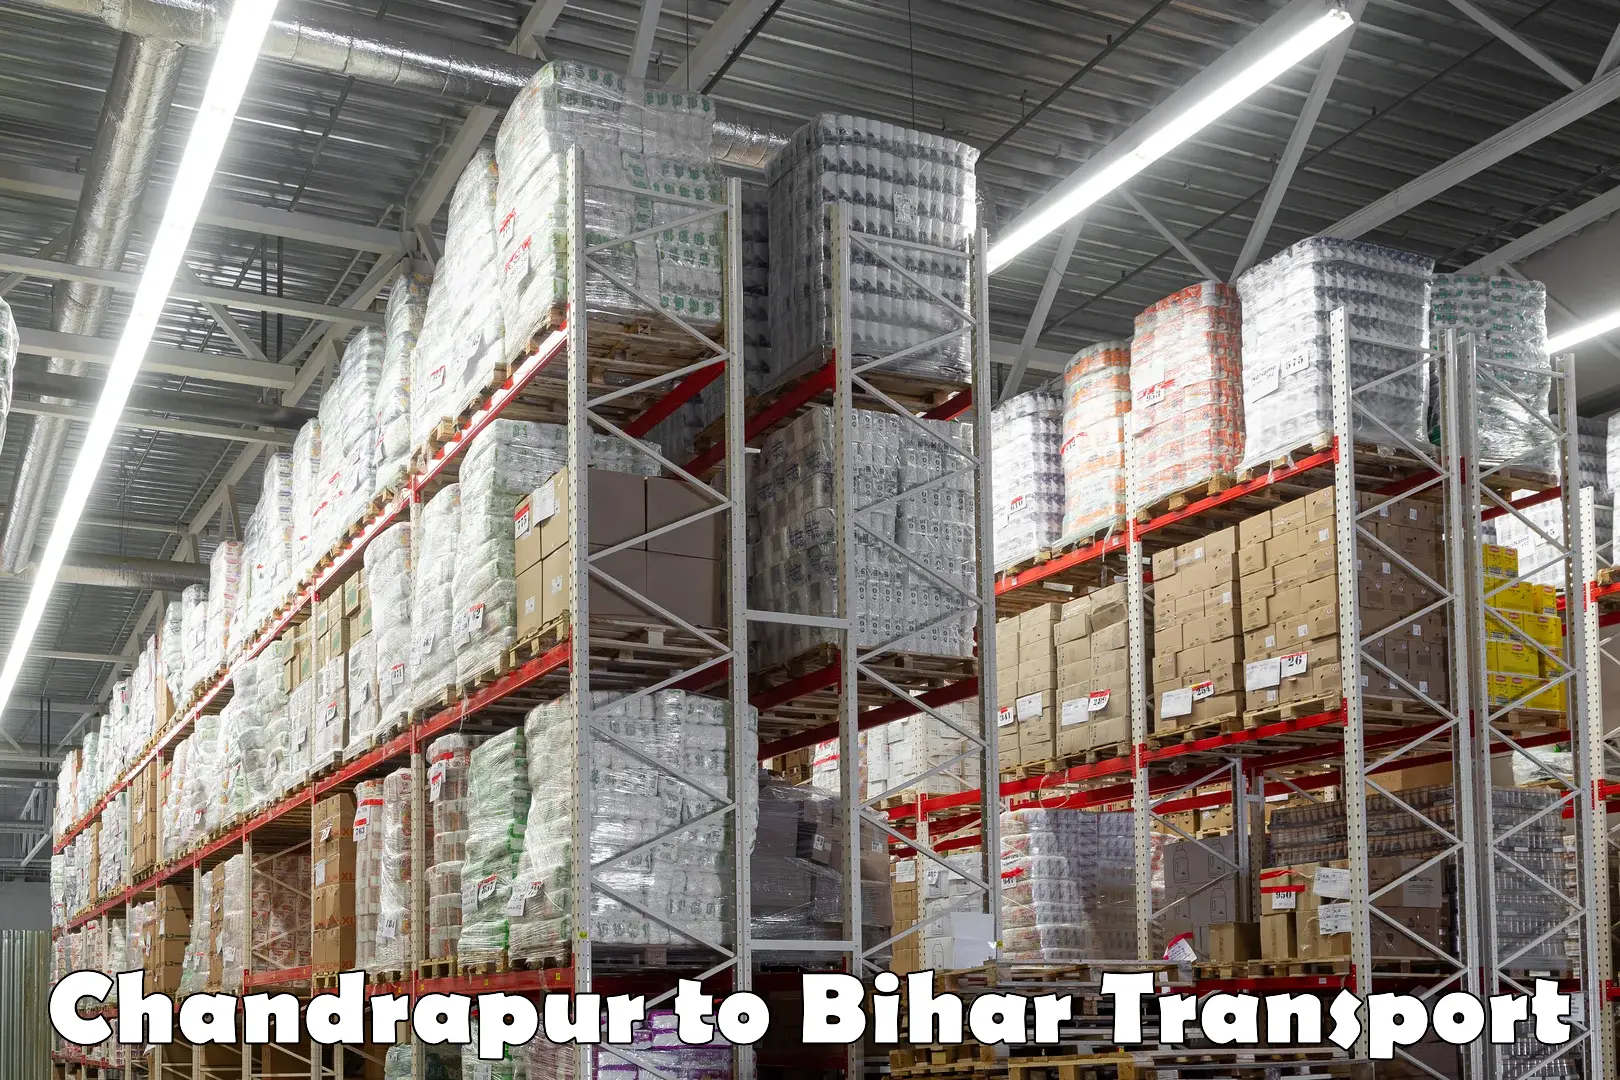 Container transport service Chandrapur to Bihar